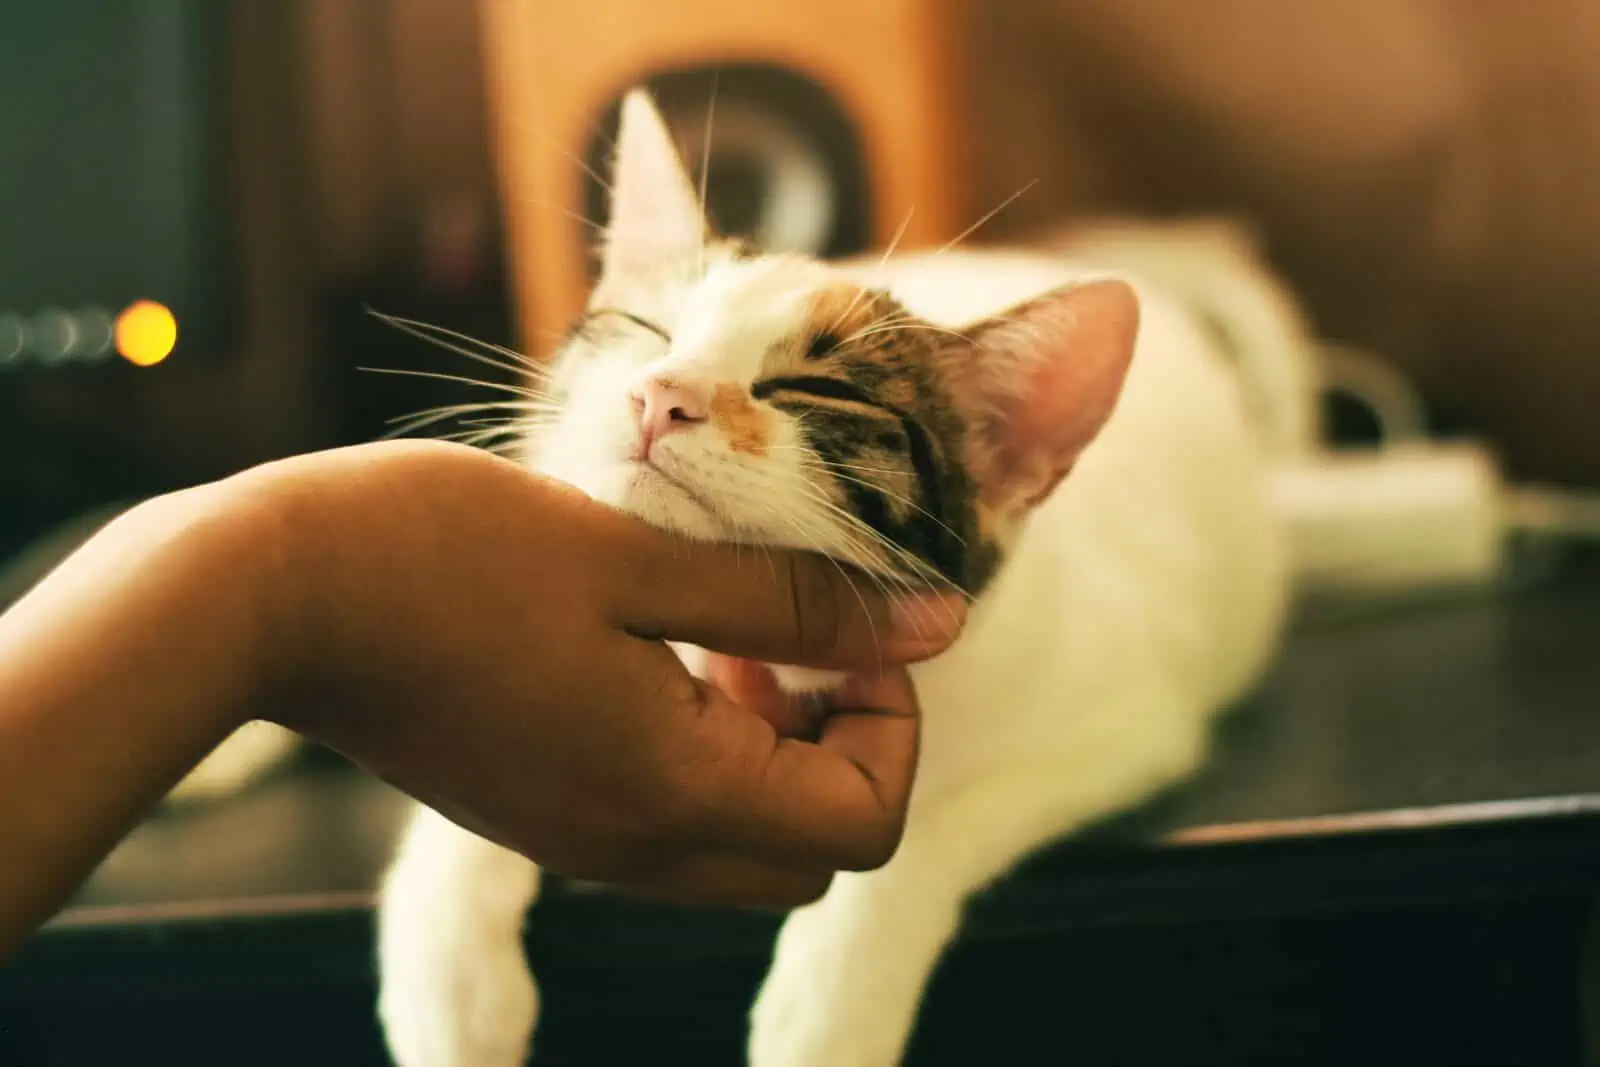 A hand scritches a cat's neck.